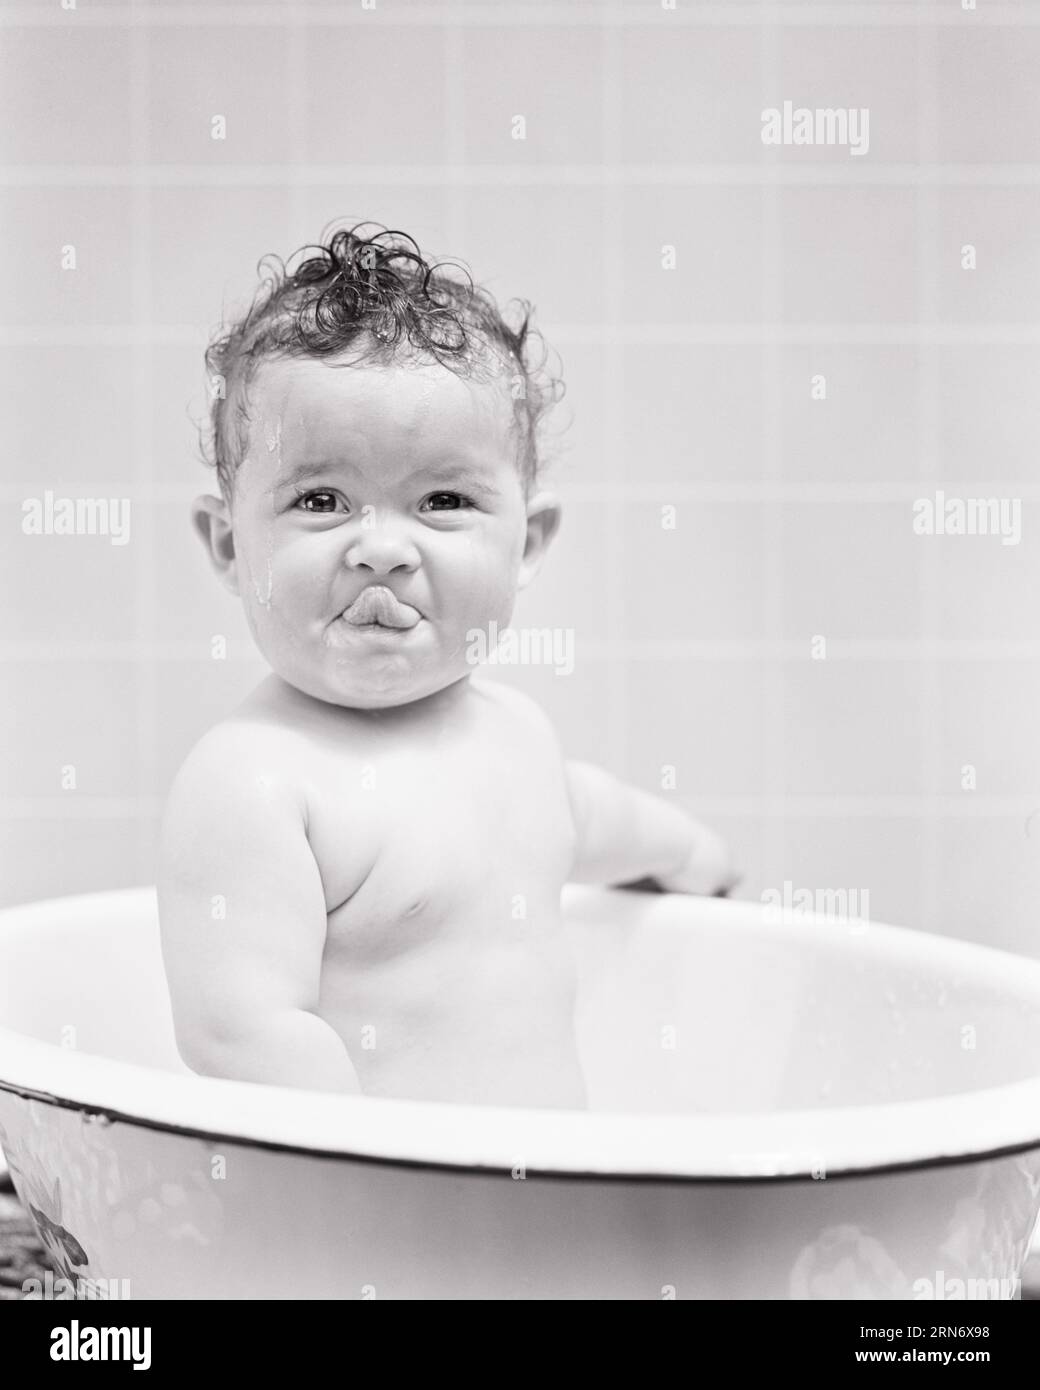 1940s SMILING BABY GIRL SITTING IN BATHTUB LOOKING AT CAMERA TONGUE LICKING TOP LIP  - b8783 HAR001 HARS BRUNETTE HUMOROUS LICKING EXCITEMENT COMICAL COMEDY STICKING OUT TONGUE PLEASANT AGREEABLE CHARMING COOPERATION GROWTH JUVENILES LIP LOVABLE PLEASING ADORABLE APPEALING BABY GIRL BLACK AND WHITE CAUCASIAN ETHNICITY HAR001 OLD FASHIONED Stock Photo